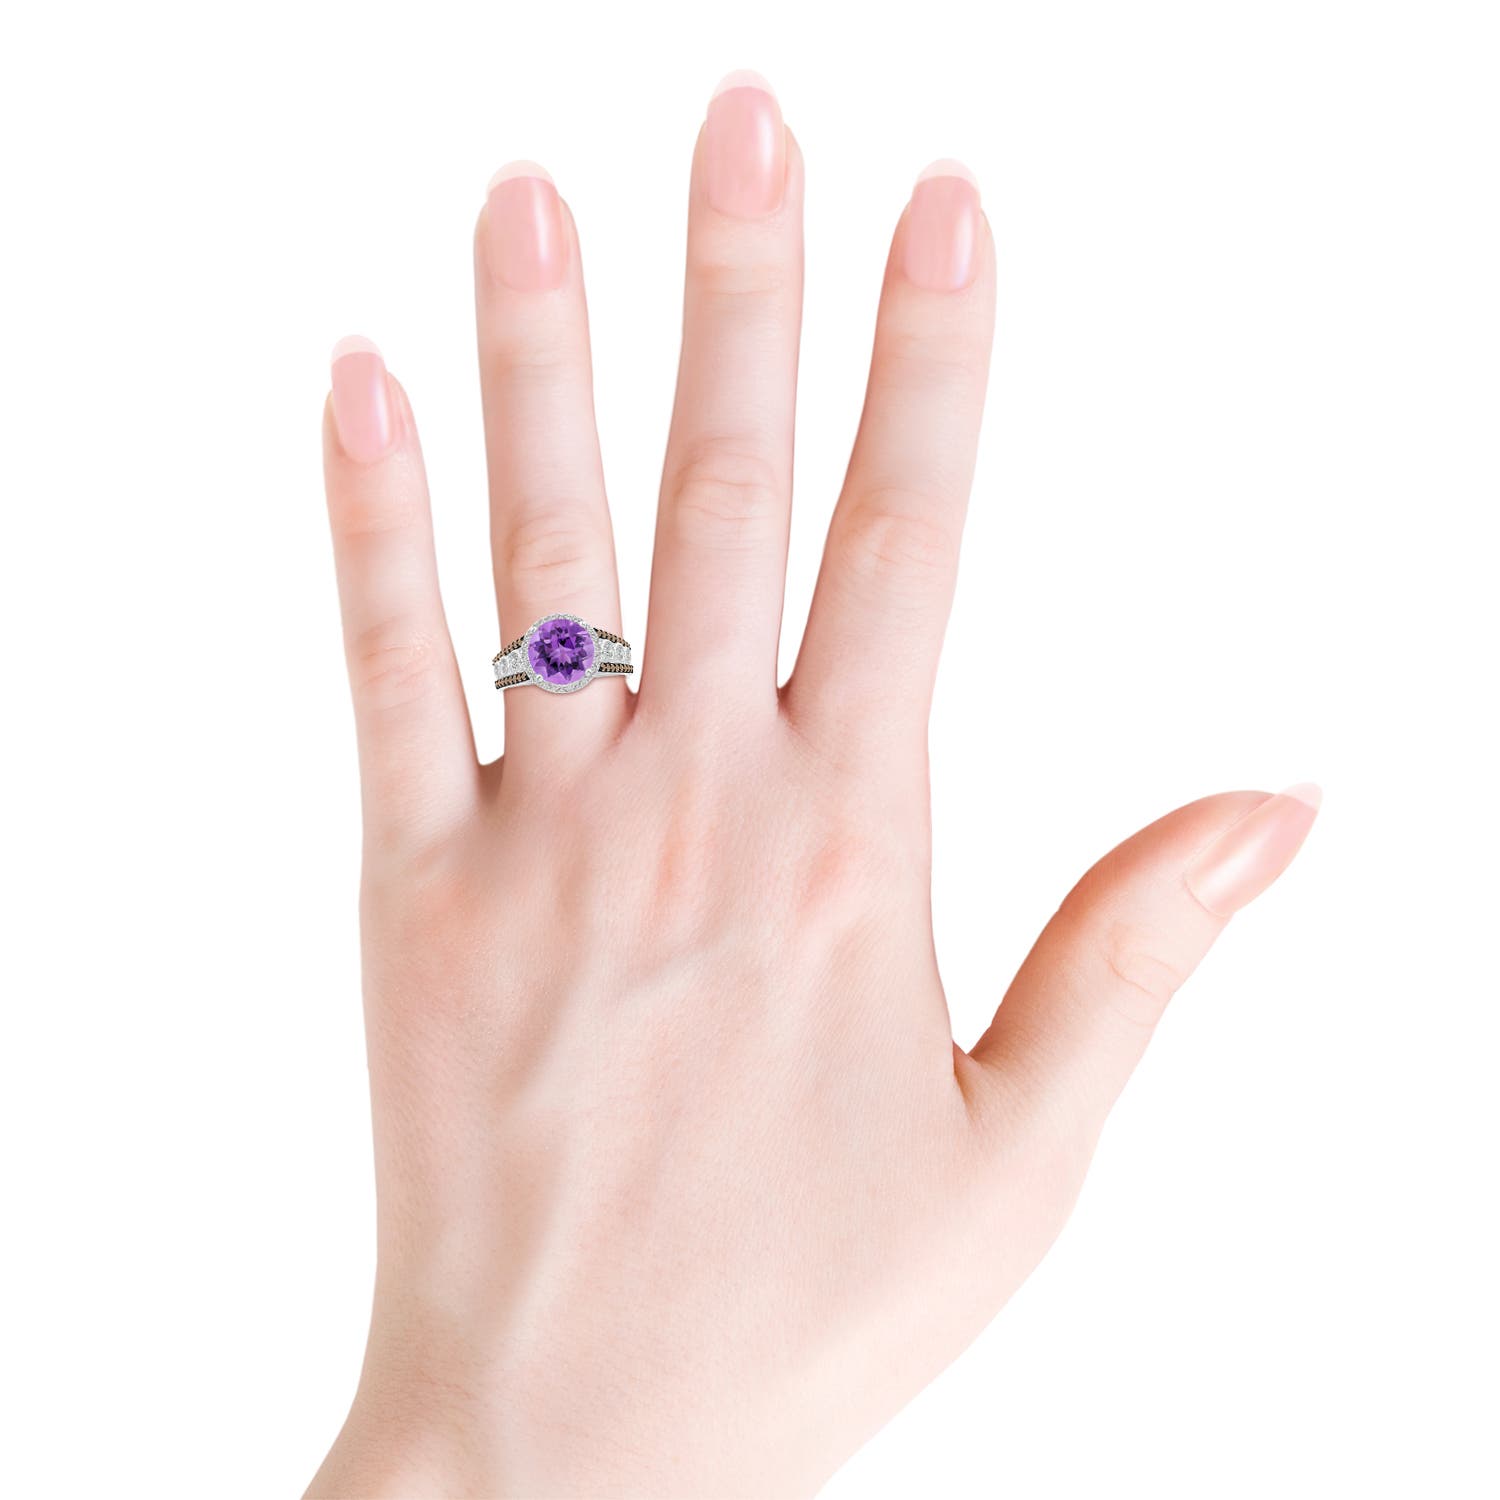 AA - Amethyst / 2.64 CT / 14 KT White Gold